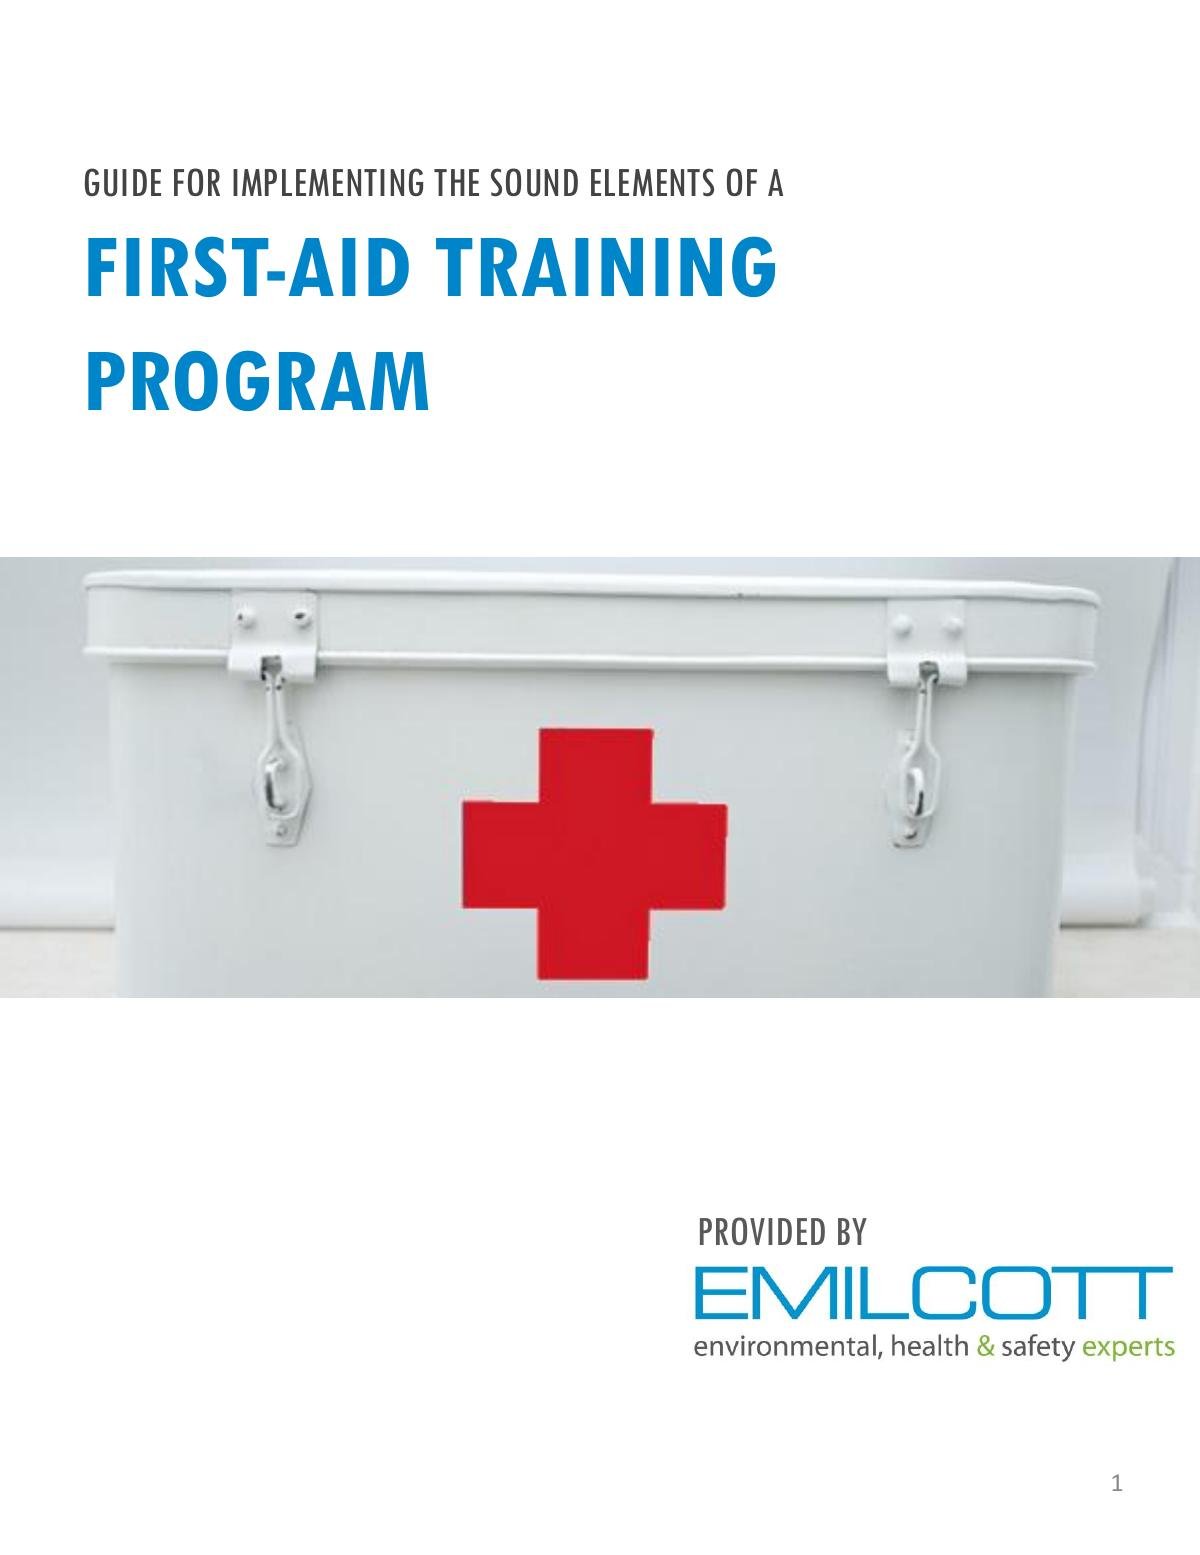 What Employers Need To Know When Implementing A First-Aid Training Program